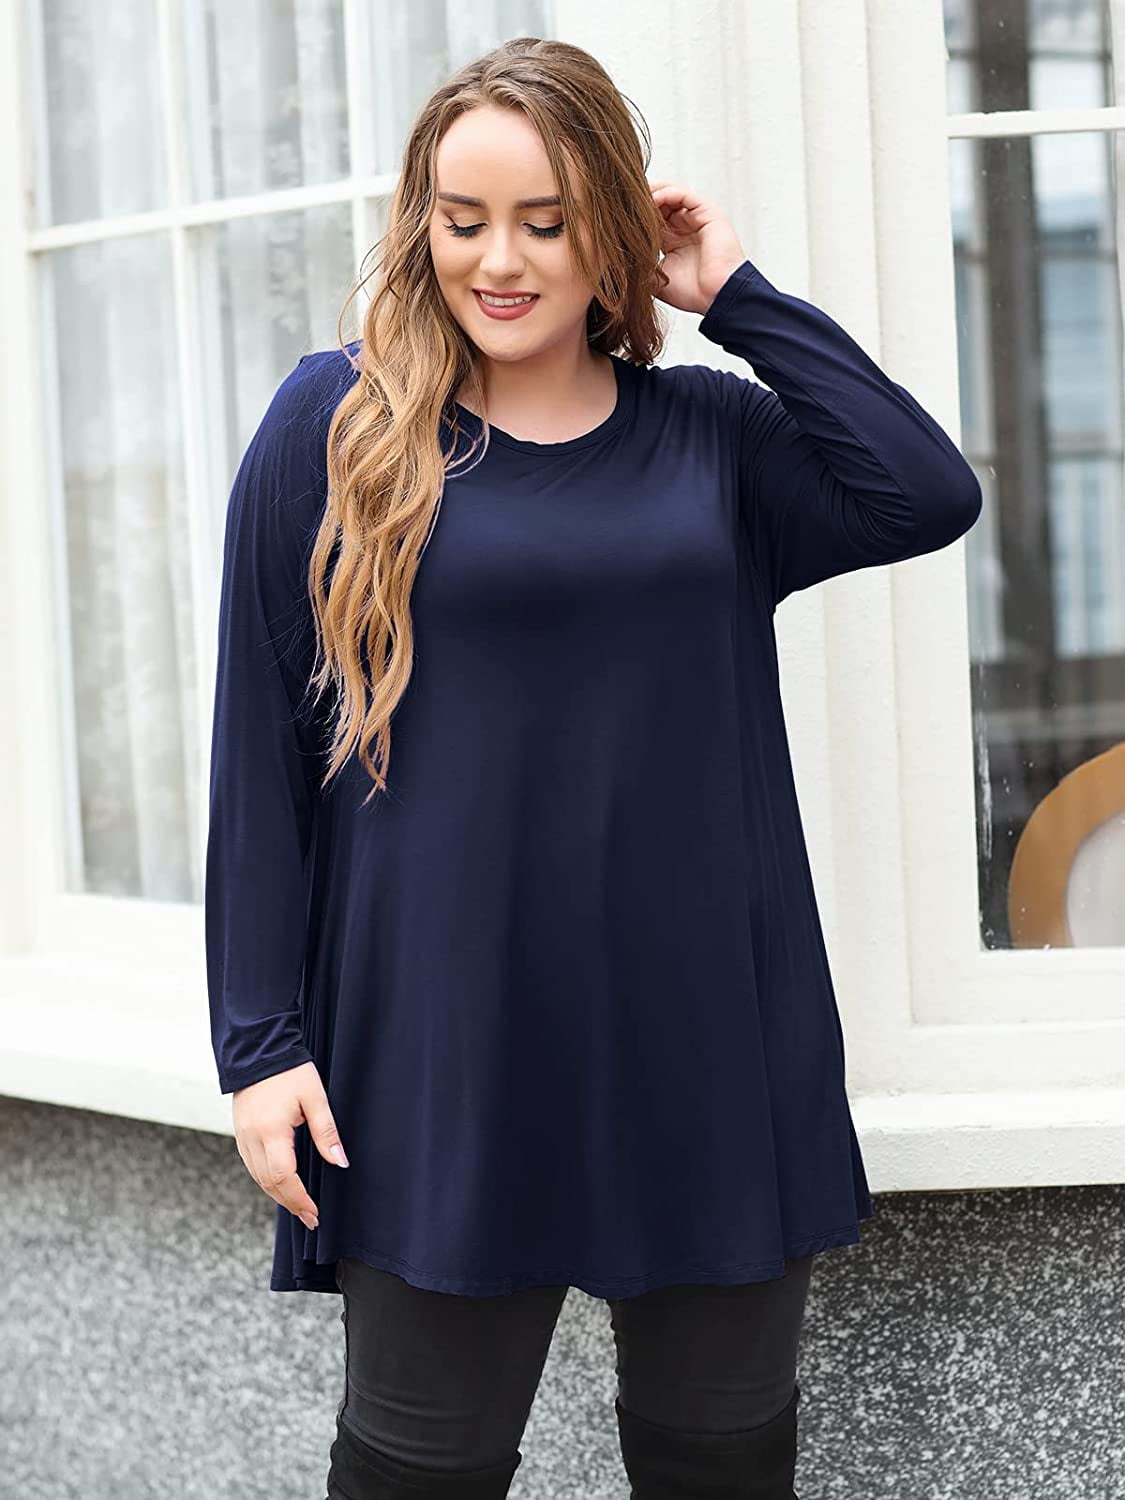 LARACE Plus Size Tunic Tops for Women Long Sleeve Swing Shirt Loose Fit  Flowy Clothing for Leggings 8053 - Navy Blue / 1XL